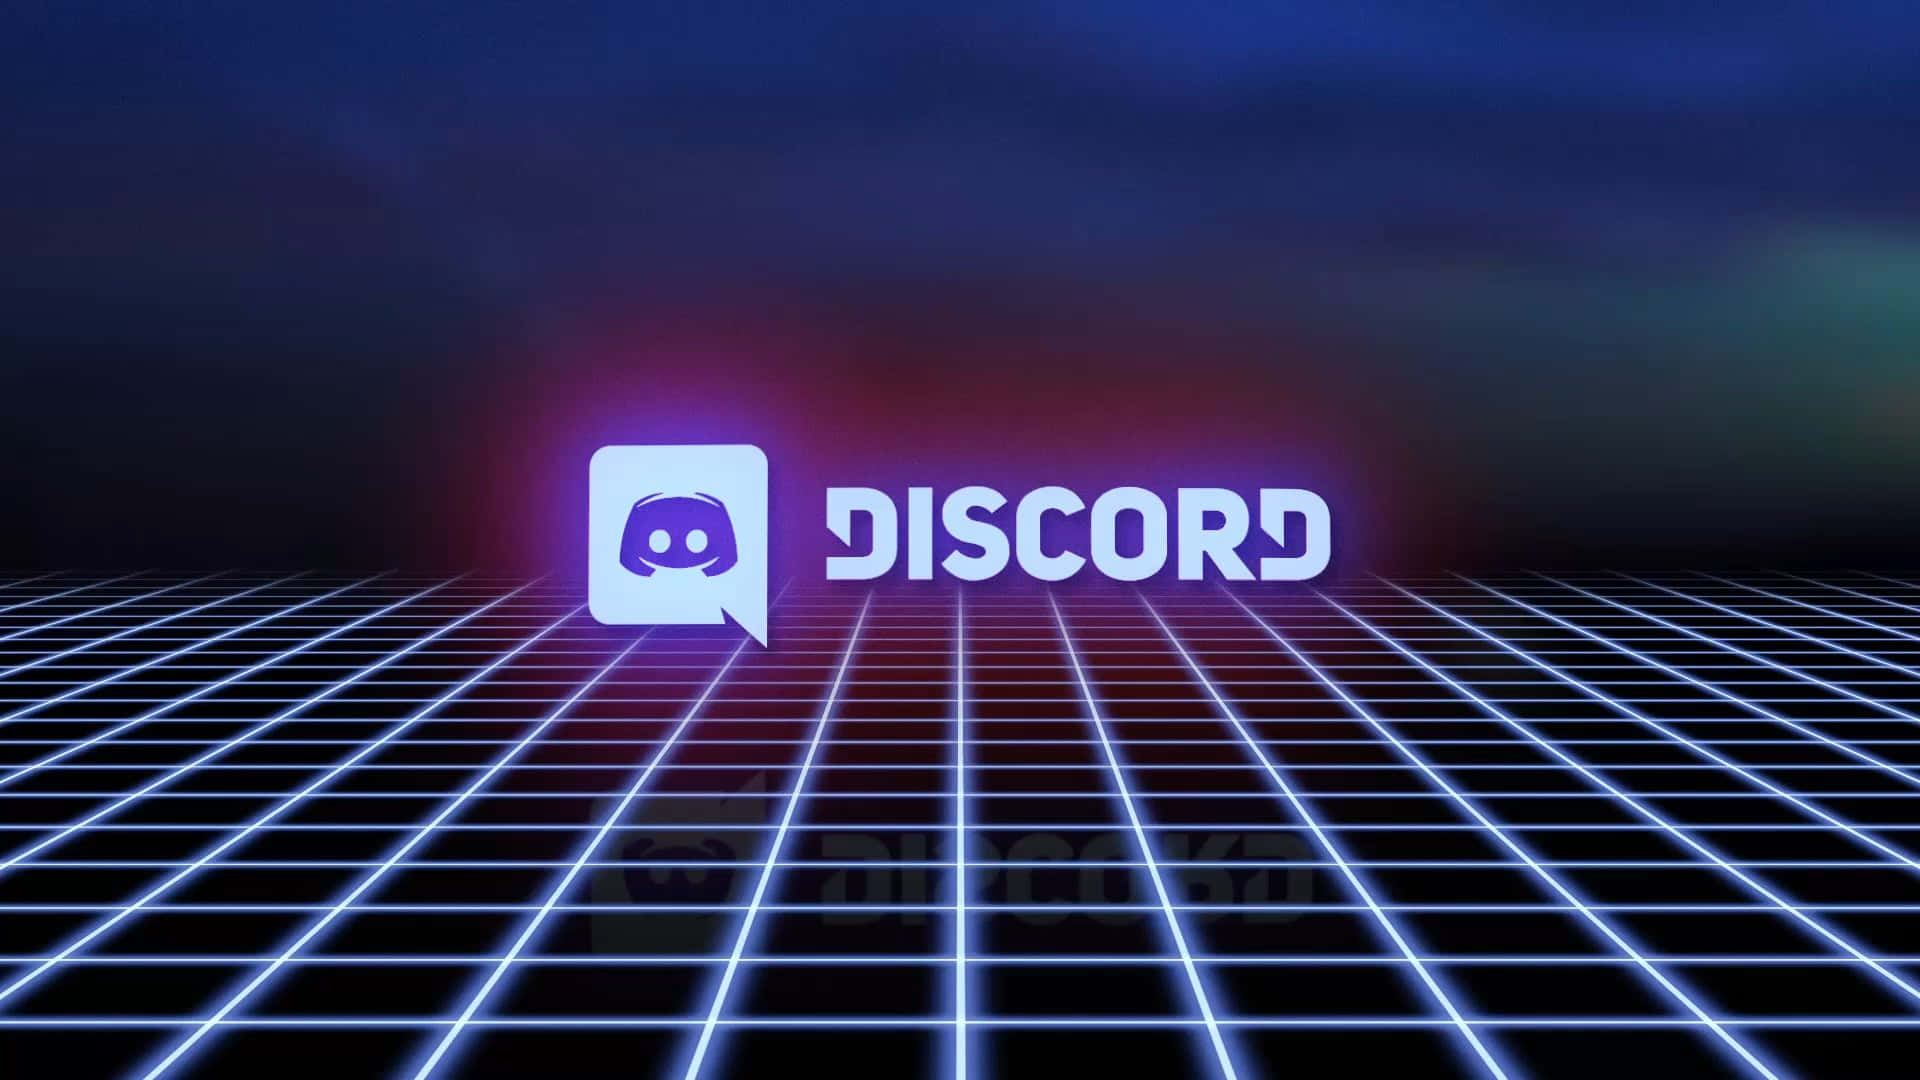 Enjoy Your Discord Experience with a Stylish Background